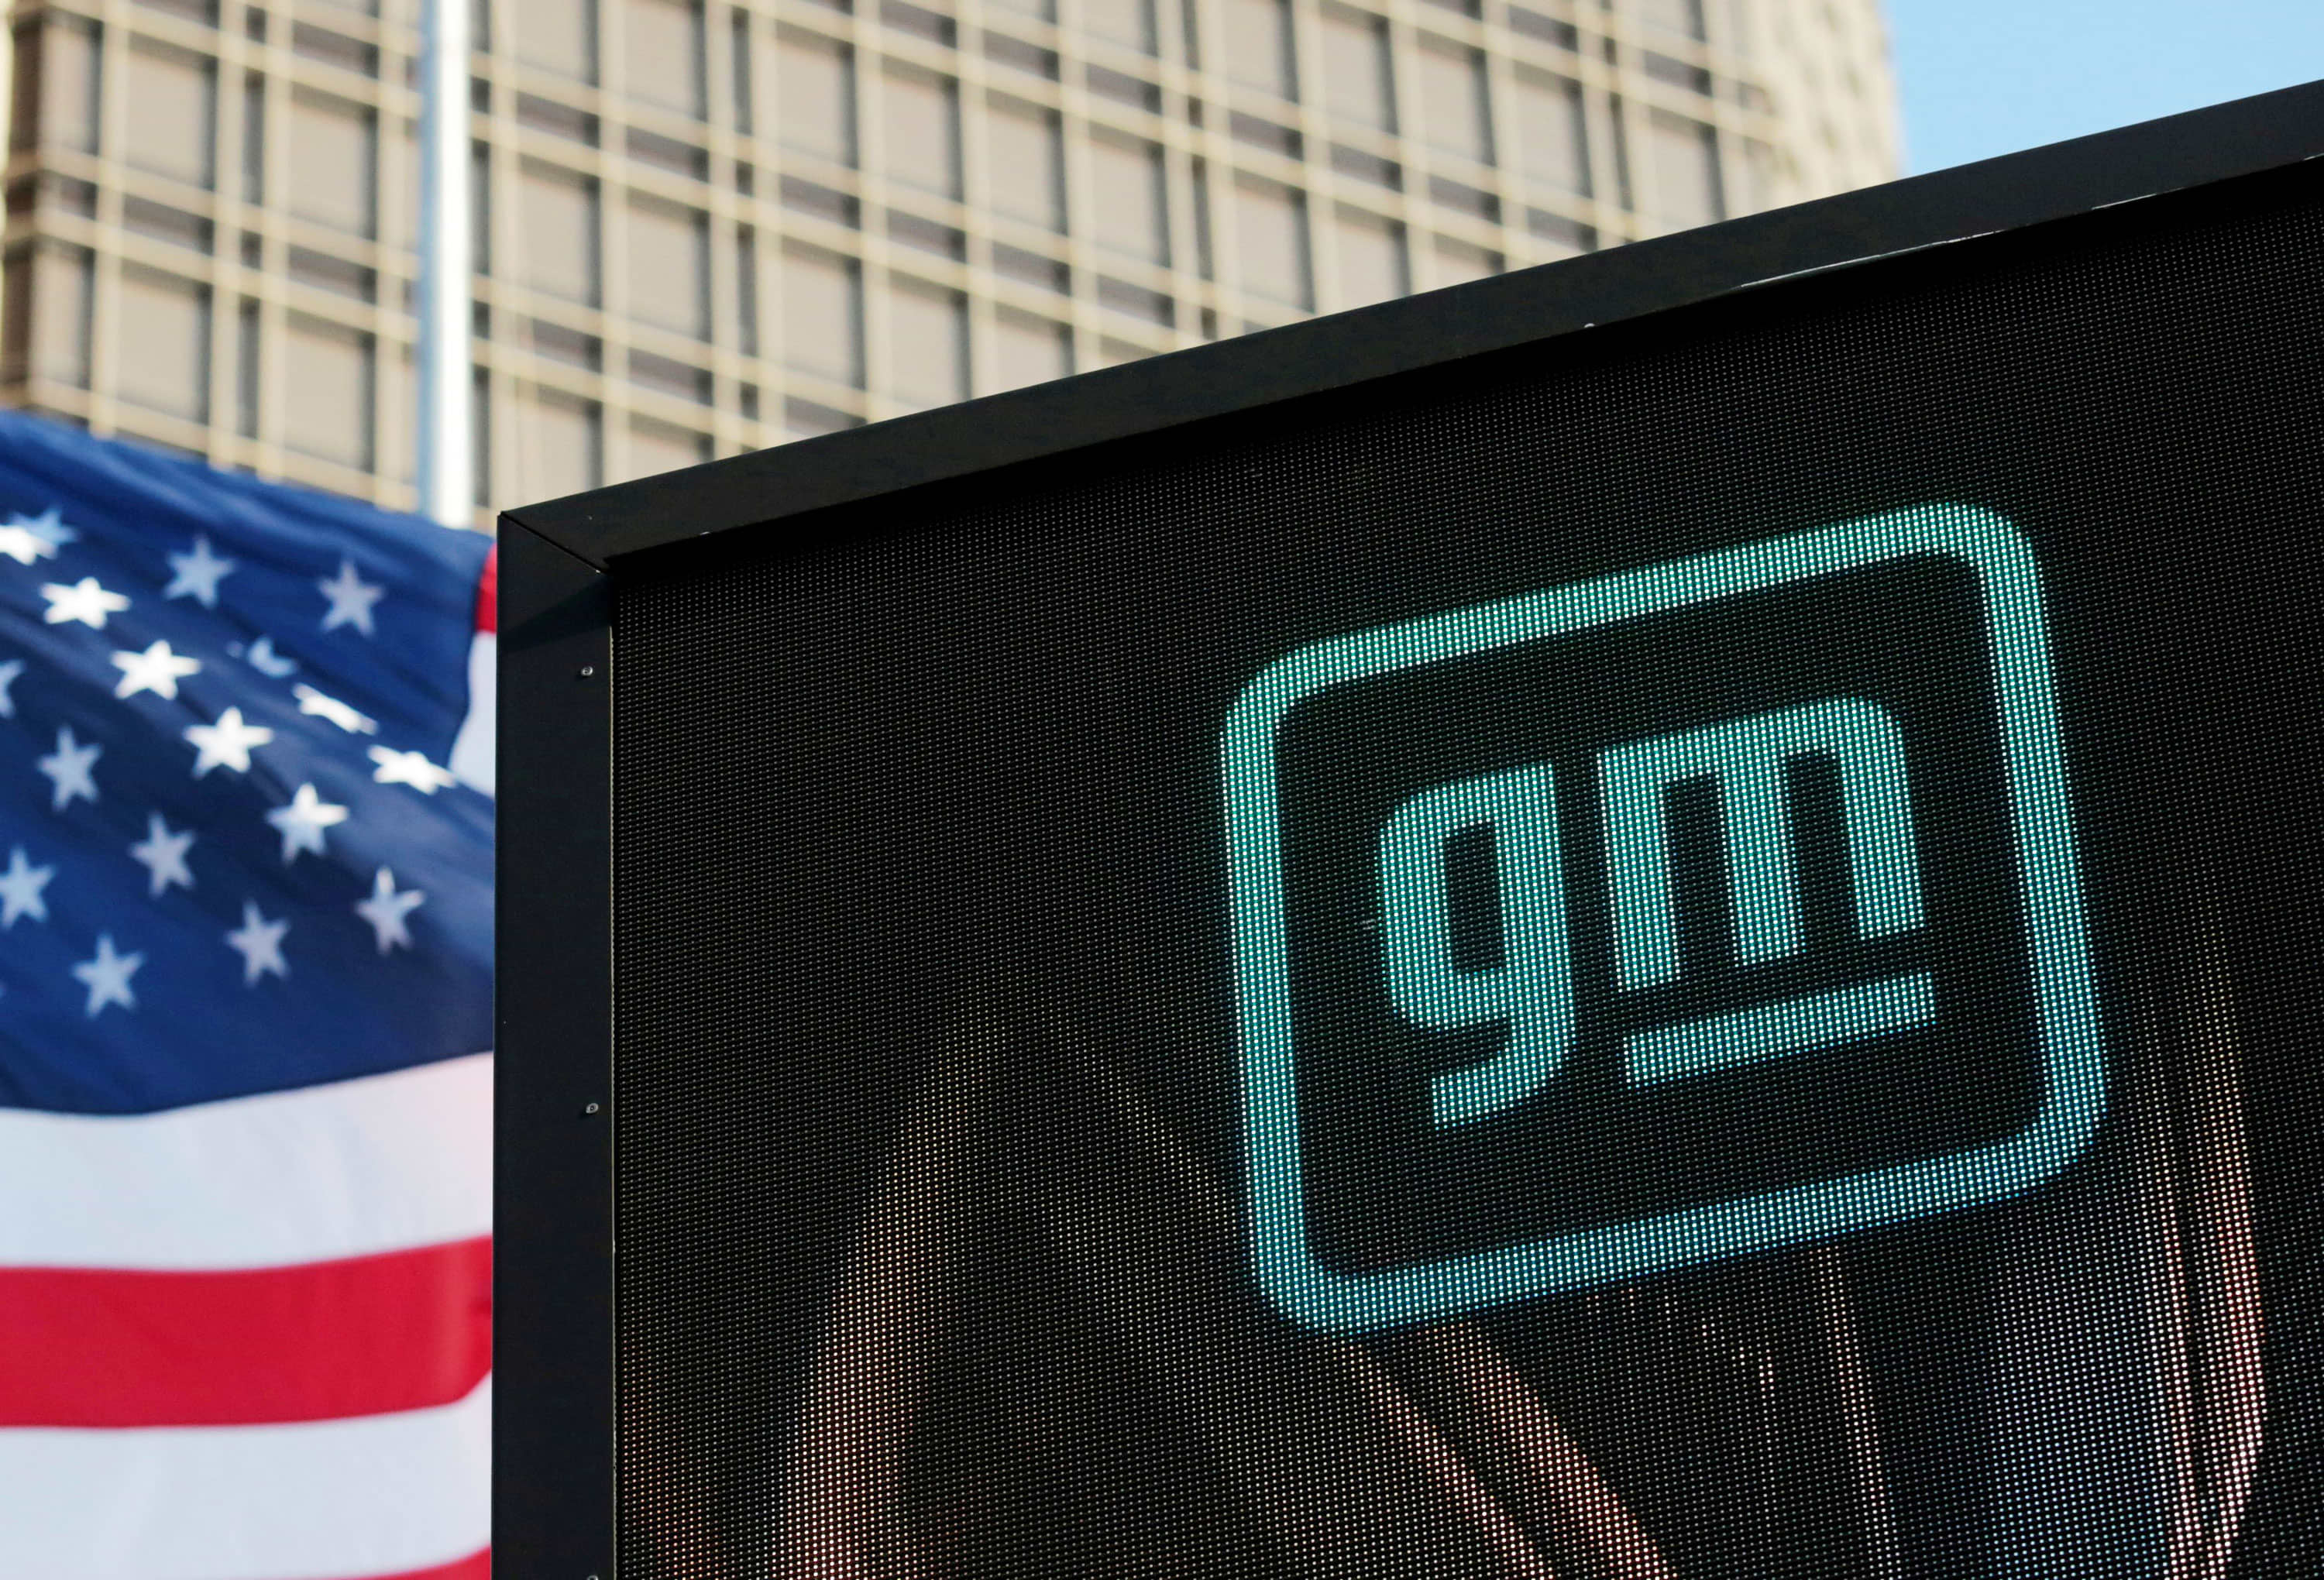 GM’s Quarterly Sales Fall But Show Improvement From Beginning Of Year